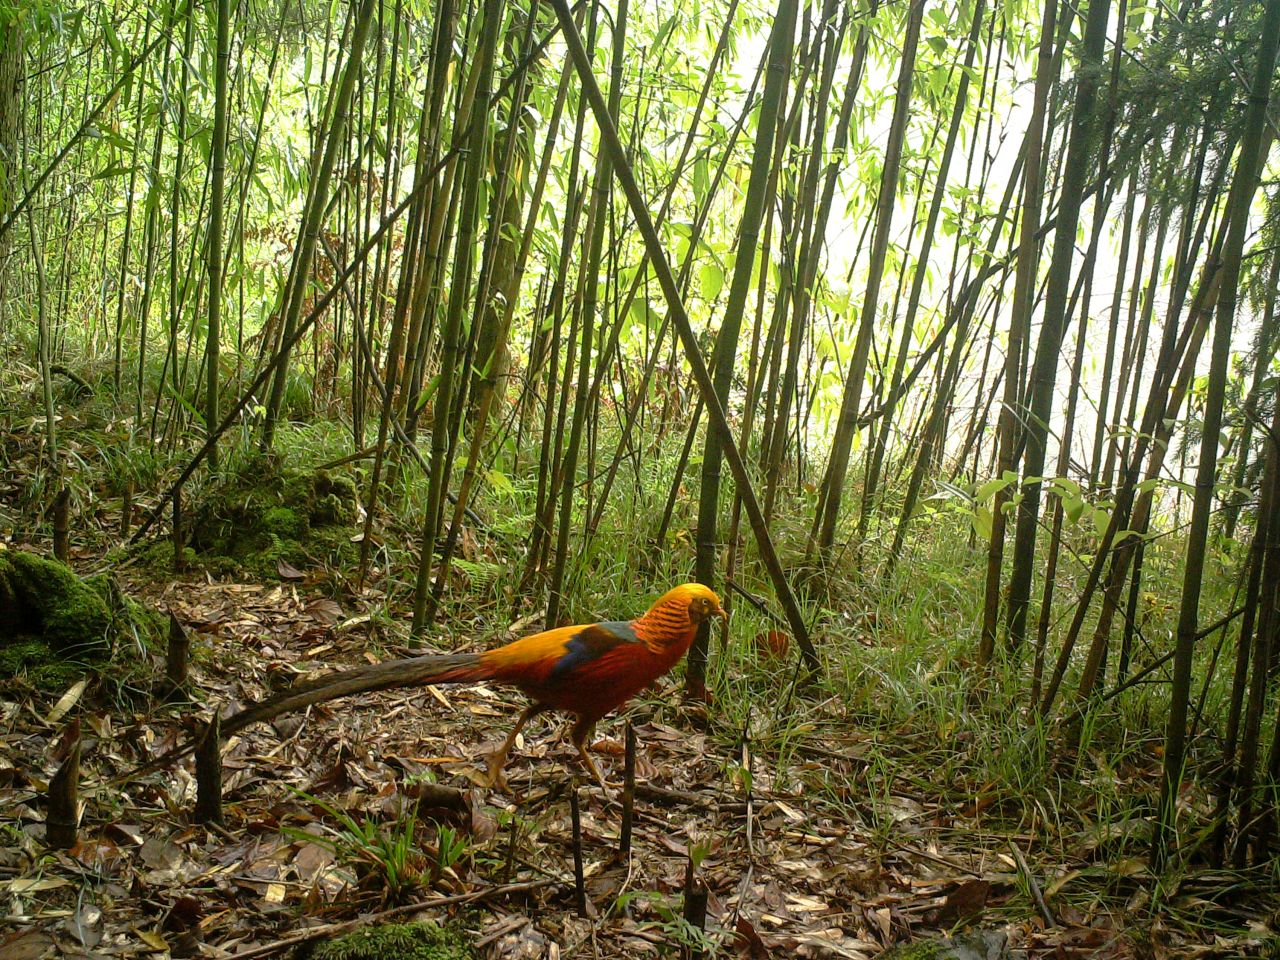 It's not just mammals that will be afforded protection in the Giant Panda National Park. Reptiles, insects, and birds -- like the golden pheasant (pictured) -- live there too. Also known as the Chinese pheasant, these shy birds are native to China, and while they are listed as being of "<a href="https://www.iucnredlist.org/species/22679355/131874282" target="_blank" target="_blank">least concern</a>" by IUCN, their <a href="http://datazone.birdlife.org/species/factsheet/golden-pheasant-chrysolophus-pictus" target="_blank" target="_blank">population is decreasing</a>. Deforestation is one of its main threats, so the protections of the new park will help to boost numbers.